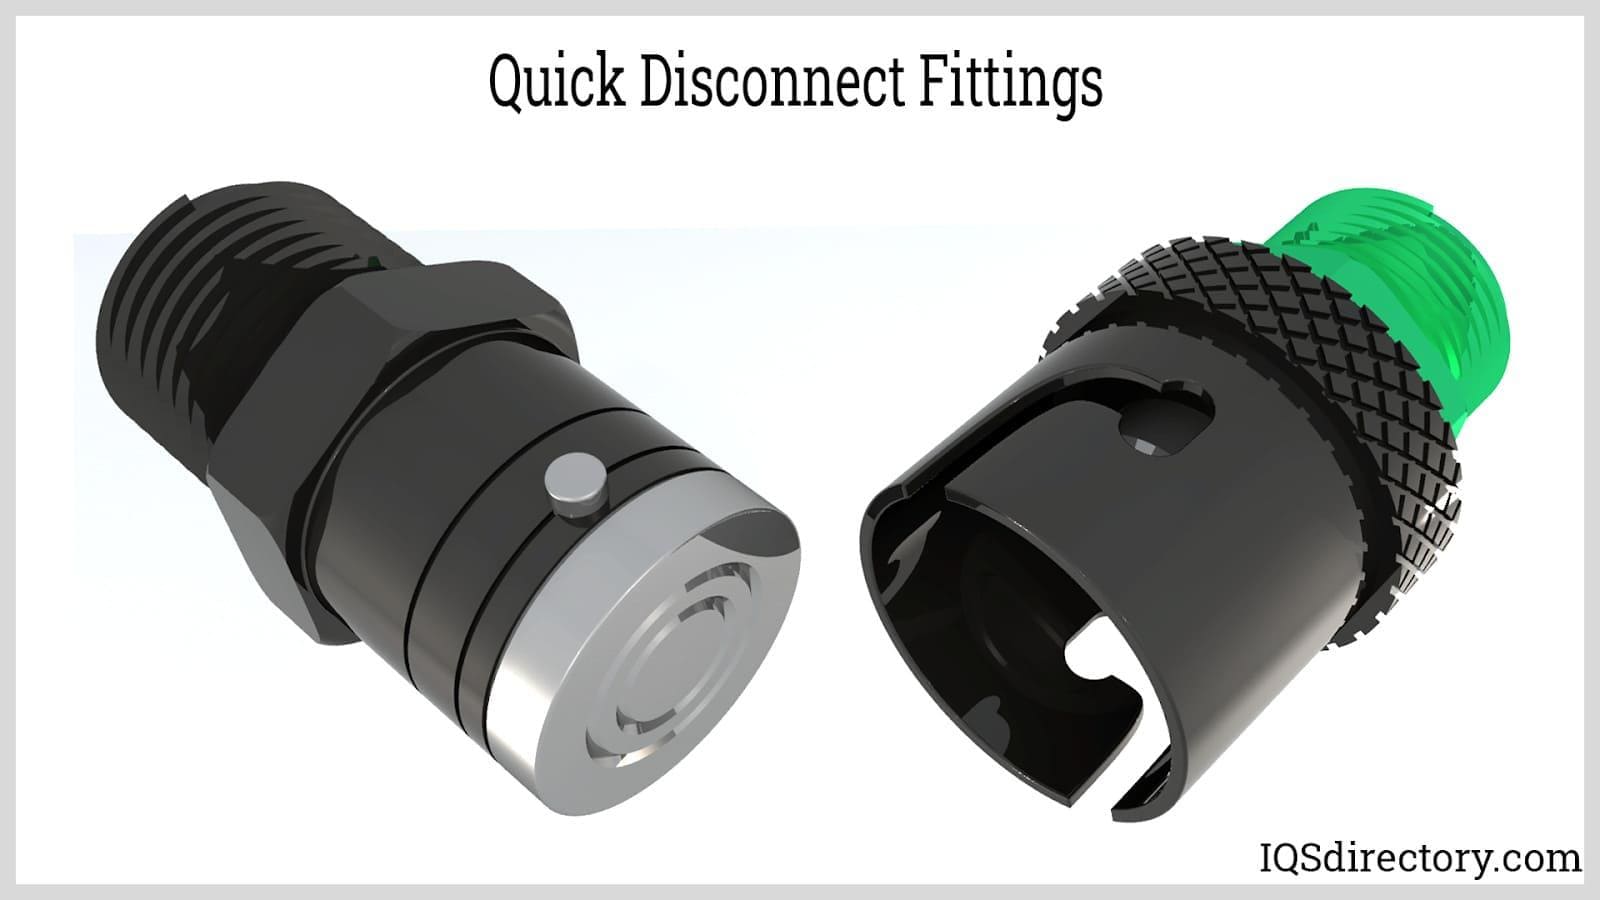 Quick Disconnect Fittings